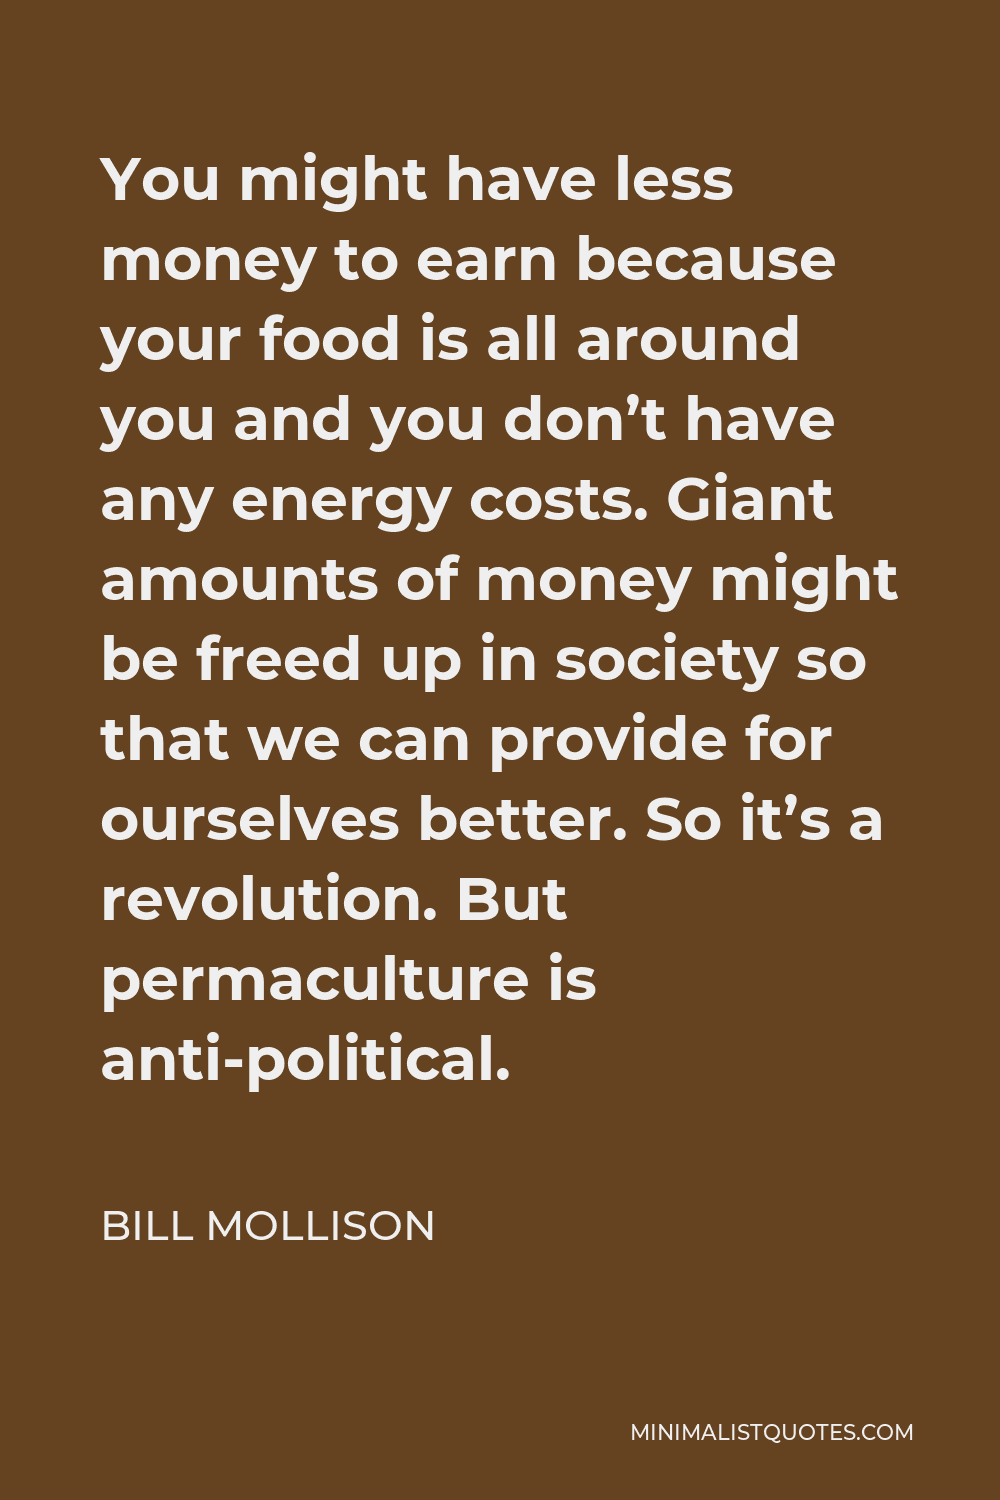 Bill Mollison Quote - You might have less money to earn because your food is all around you and you don’t have any energy costs. Giant amounts of money might be freed up in society so that we can provide for ourselves better. So it’s a revolution. But permaculture is anti-political.